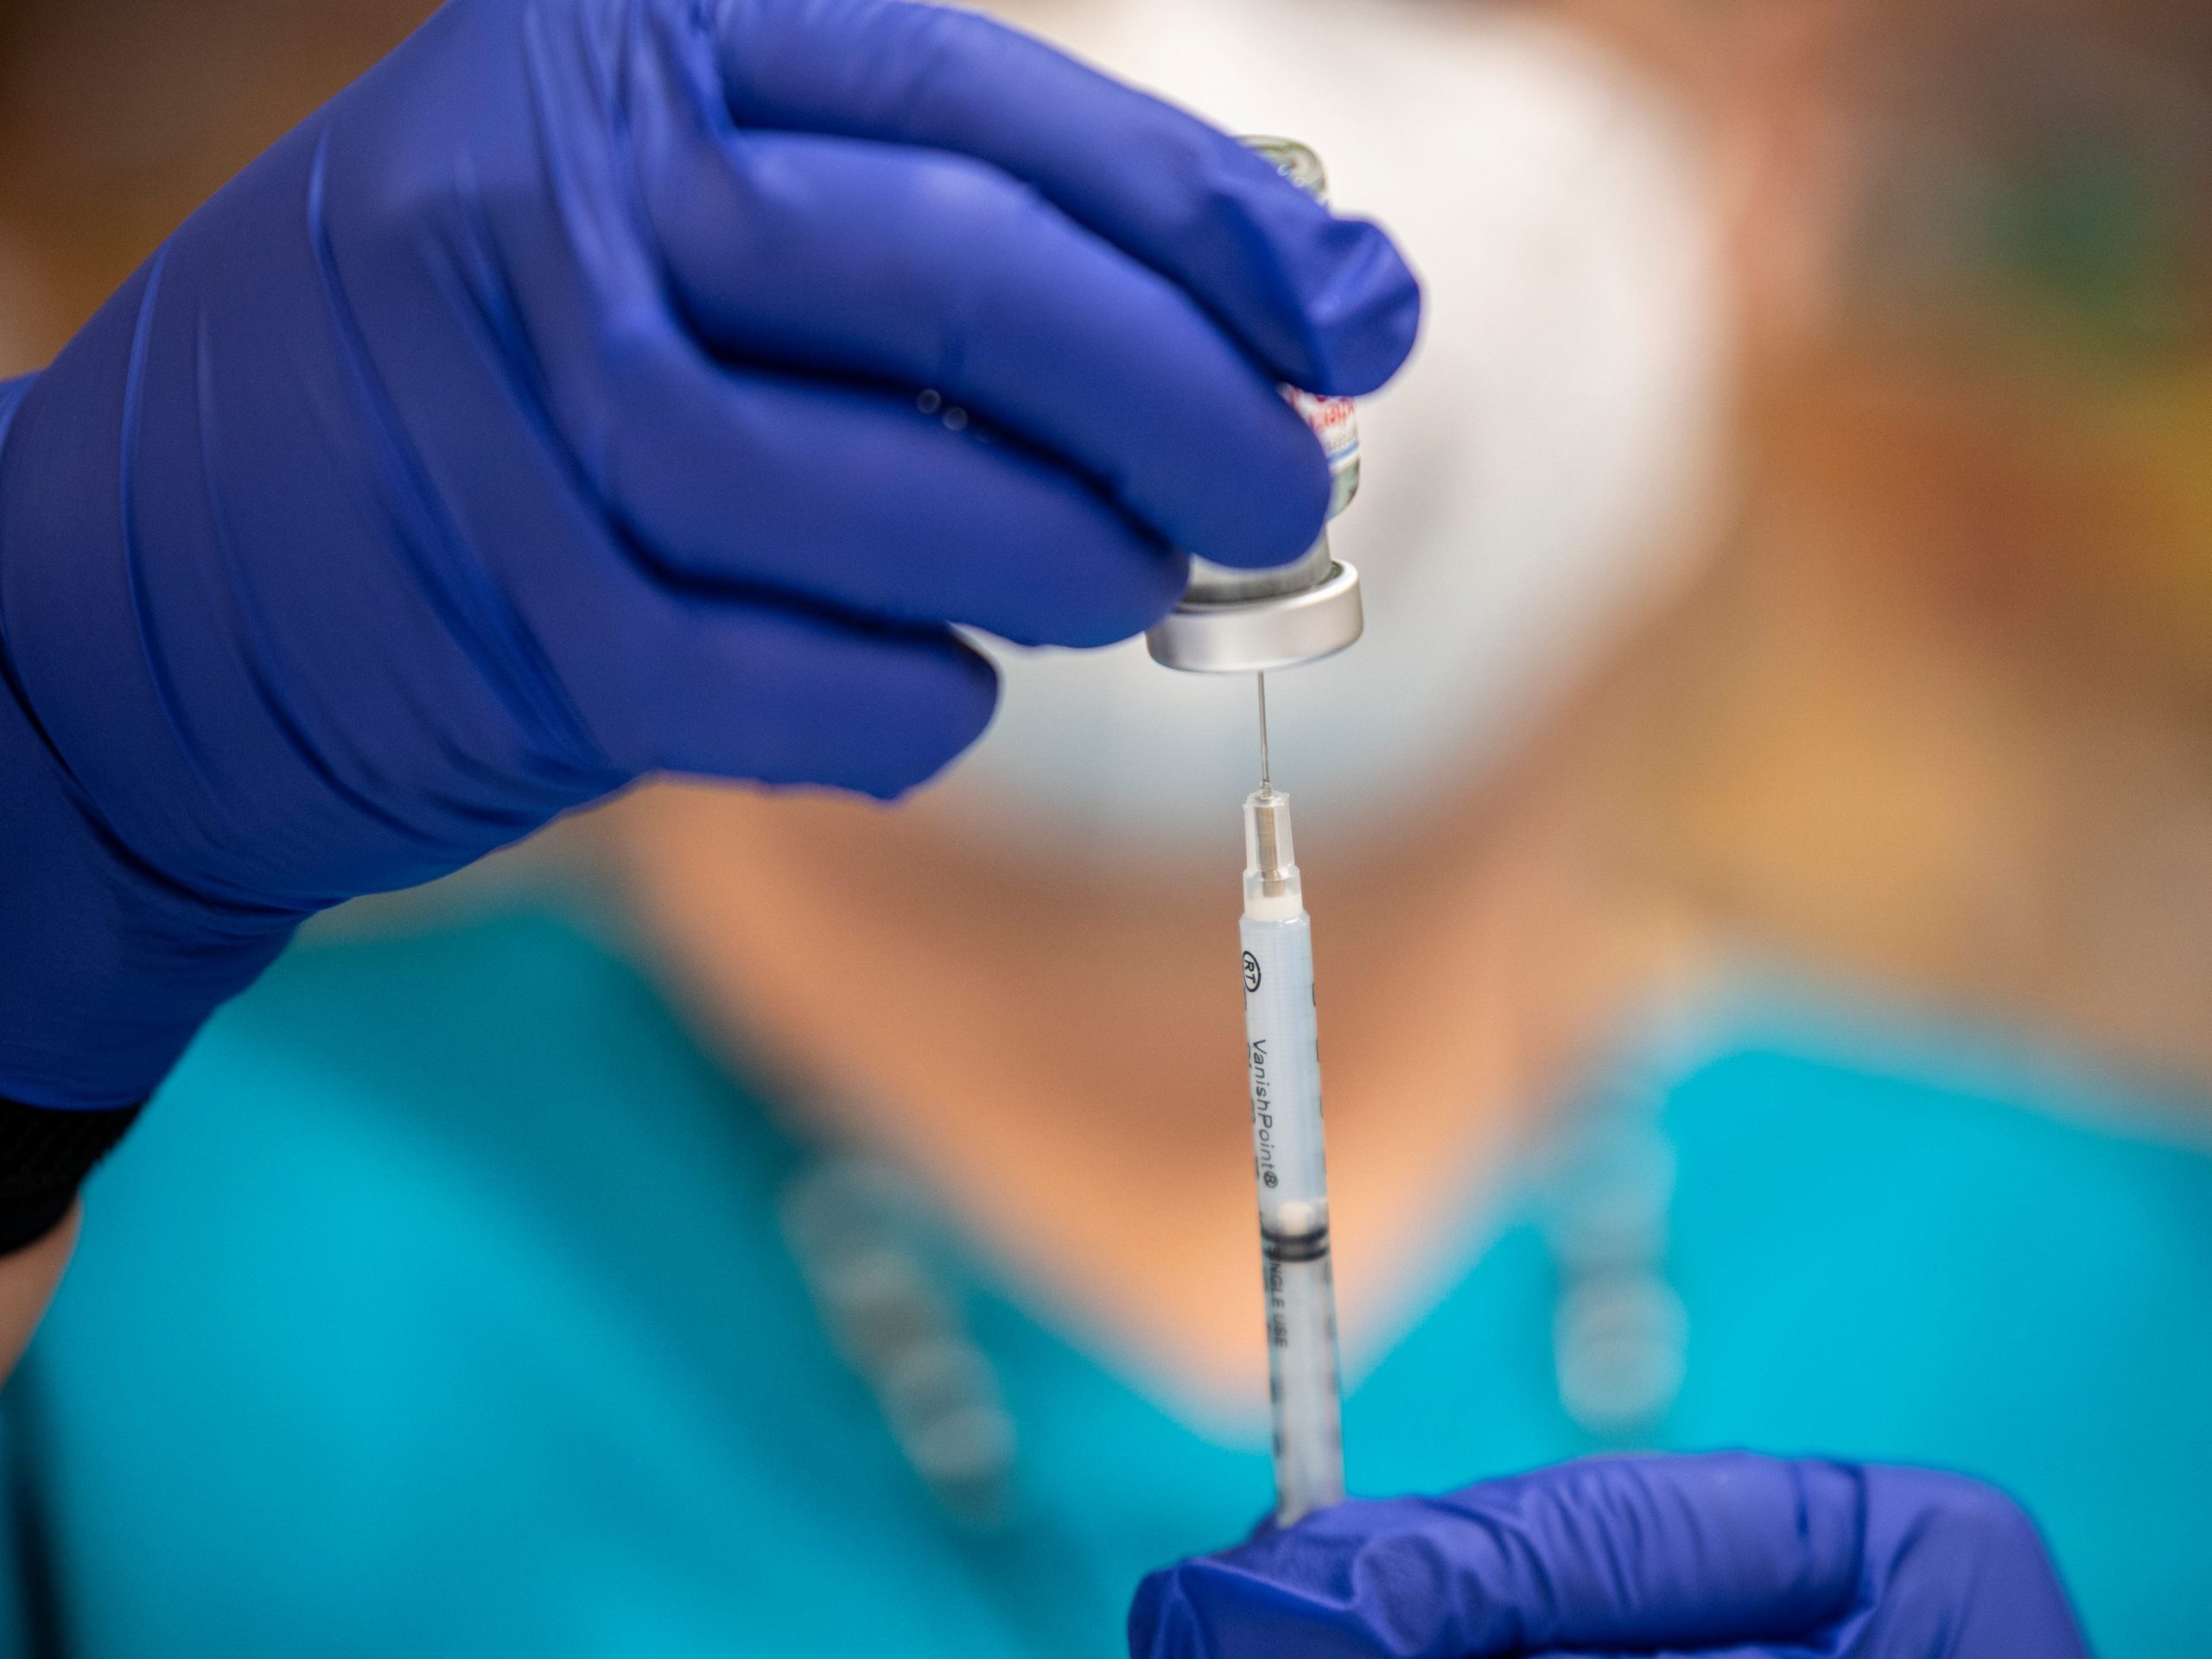 A nurse fills up a syringe with the Moderna COVID-19 vaccine at a vaccination site at a senior center on March 29, 2021 in San Antonio, Texas